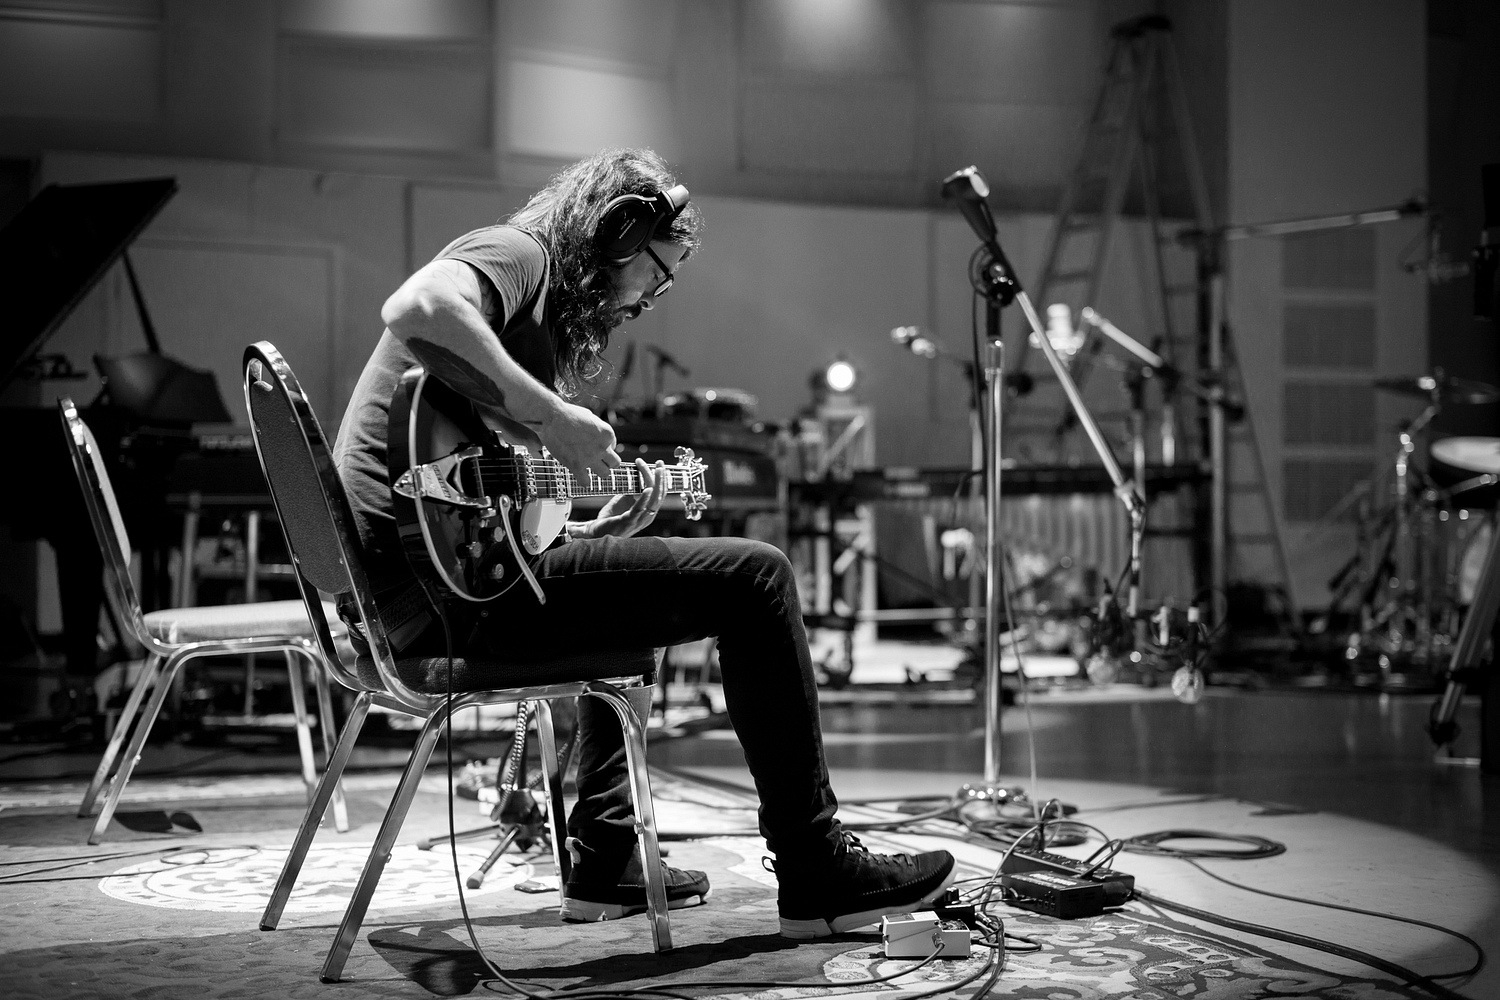 Dave Grohl Announces ‘Play’, a two-part documentary featuring a new solo 23-minute song